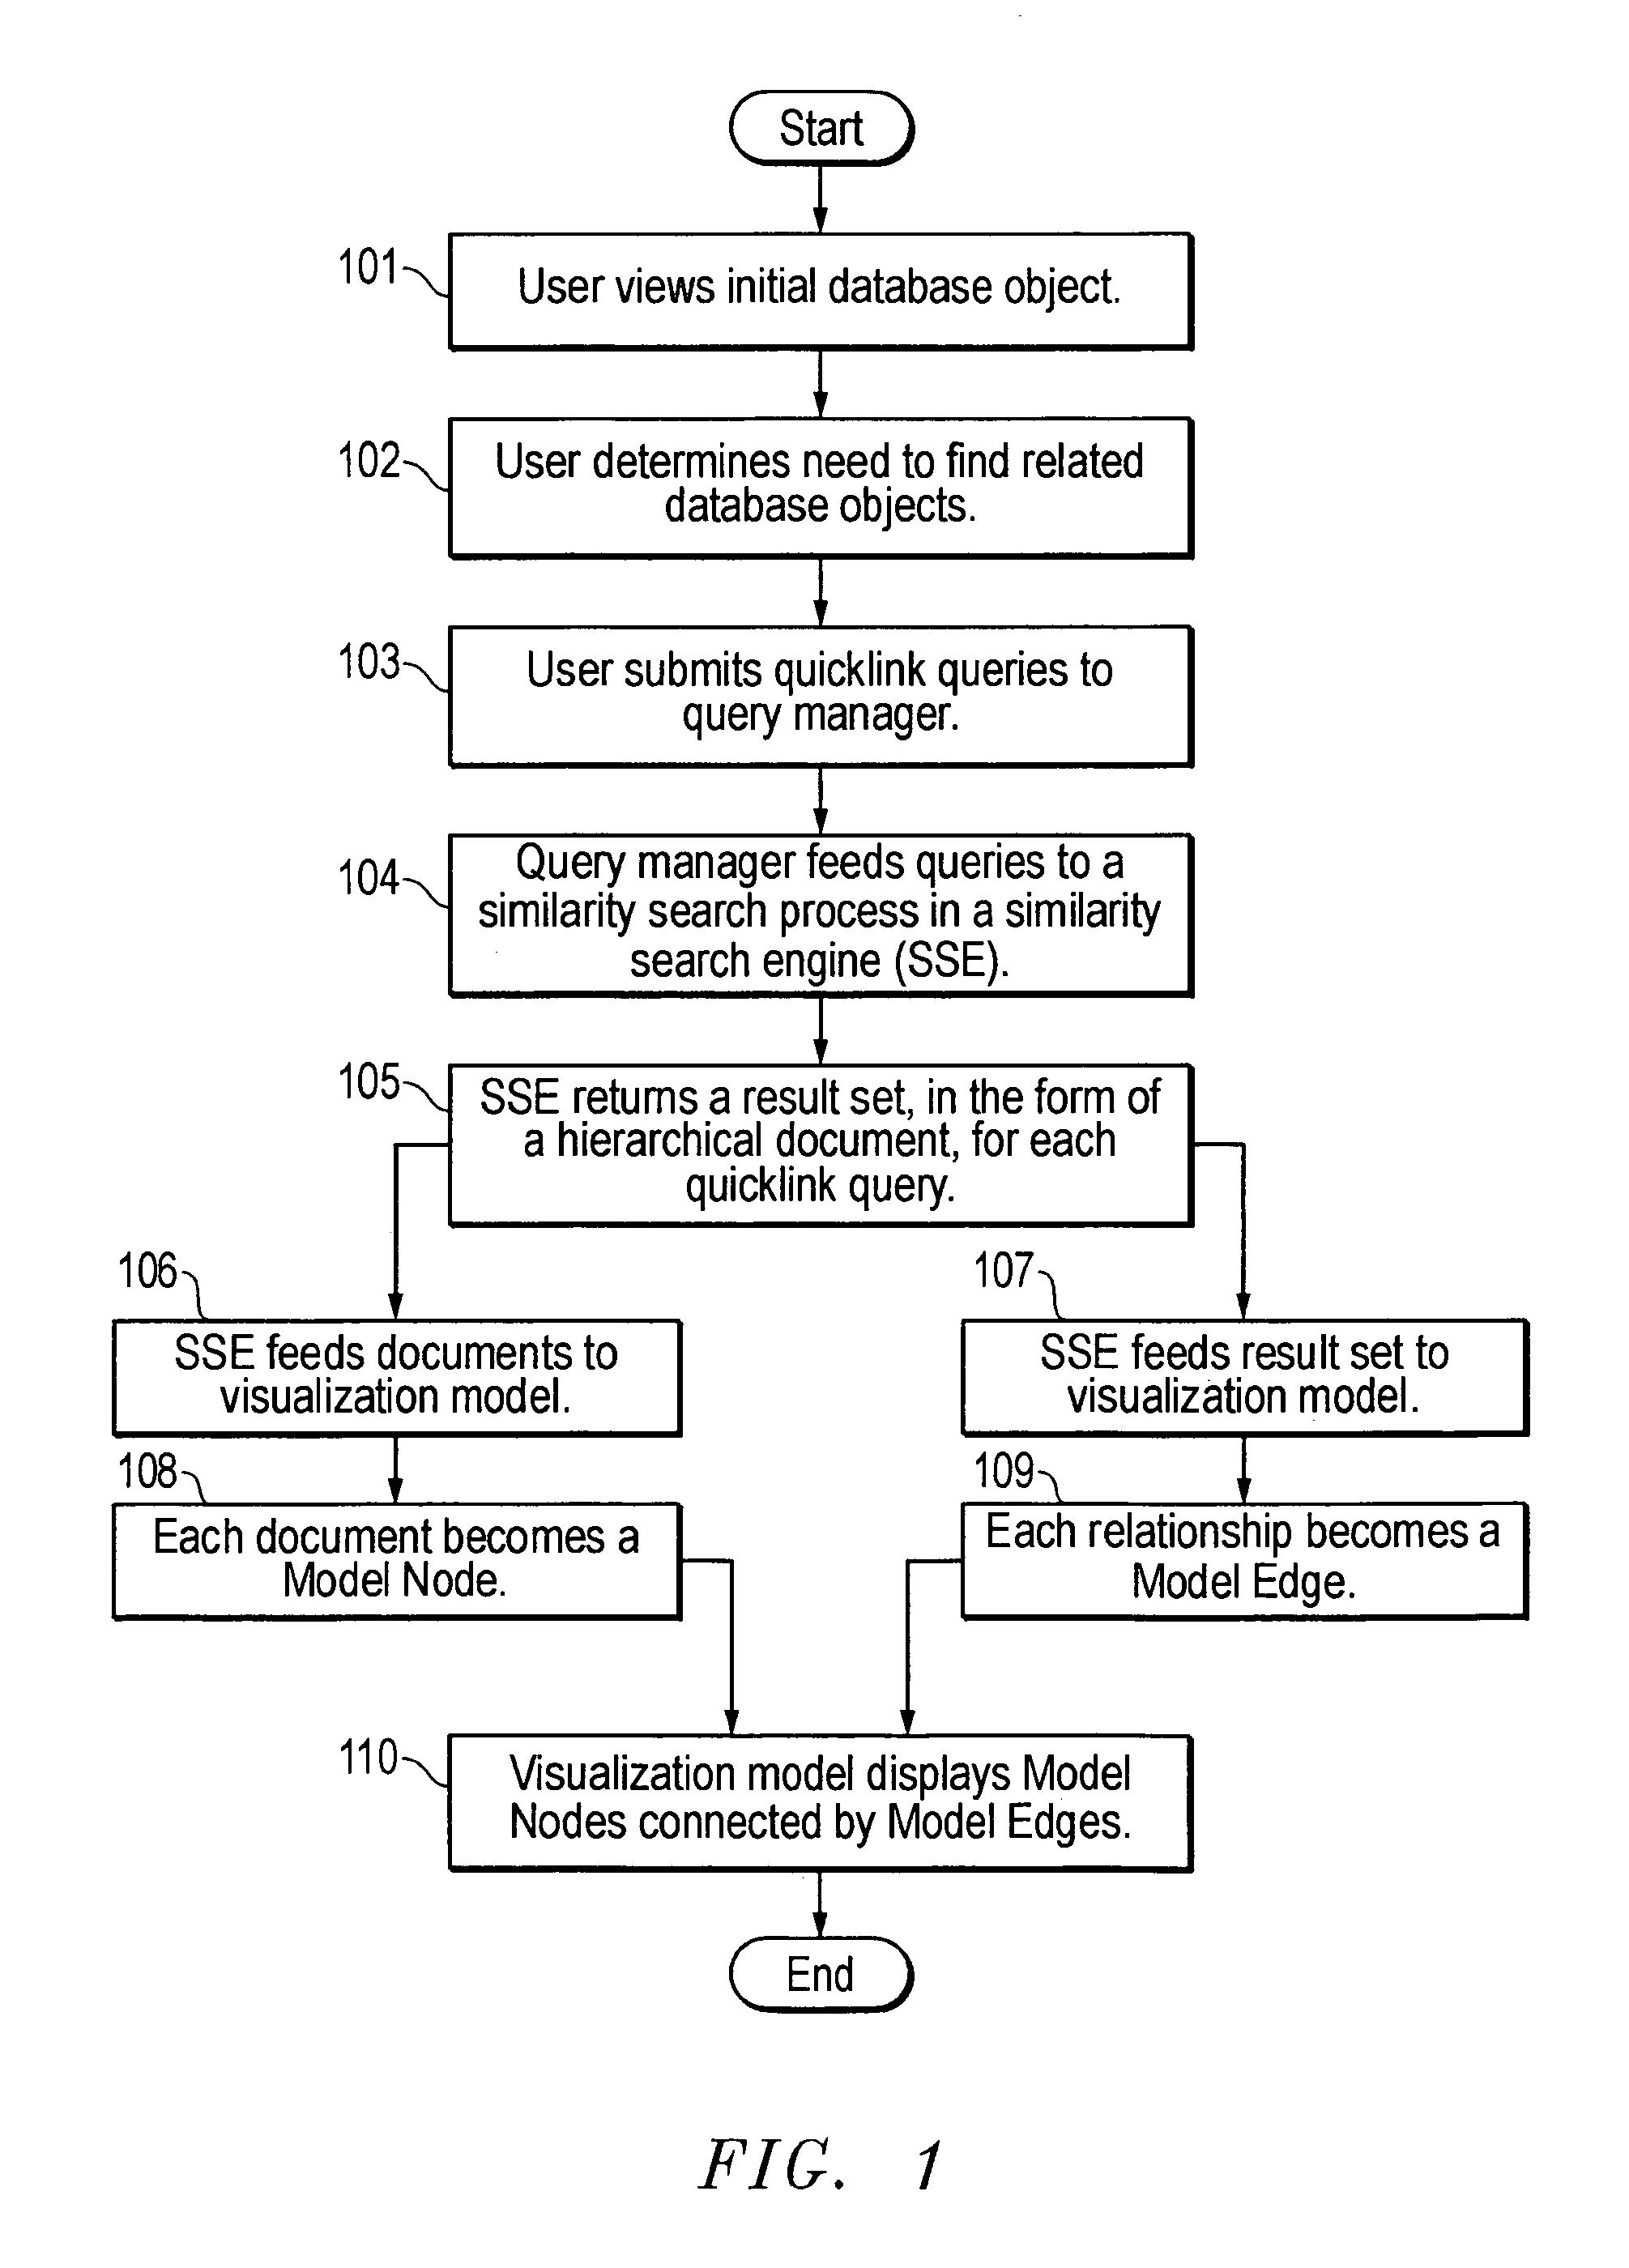 System and method for visually representing a hierarchical database objects and their similarity relationships to other objects in the database